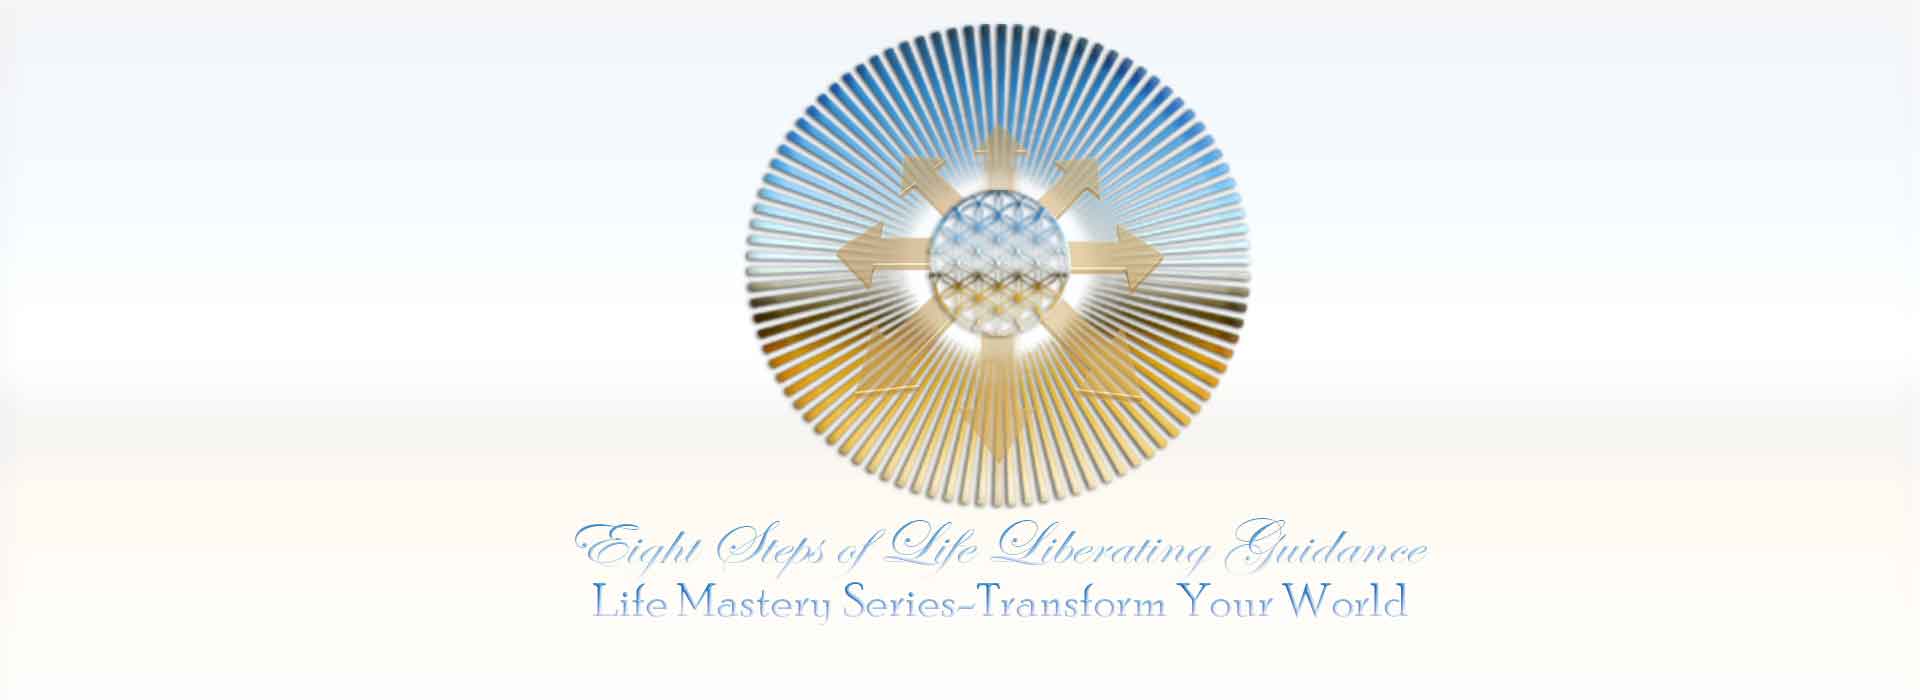 The 8 Step Life Mastery Series